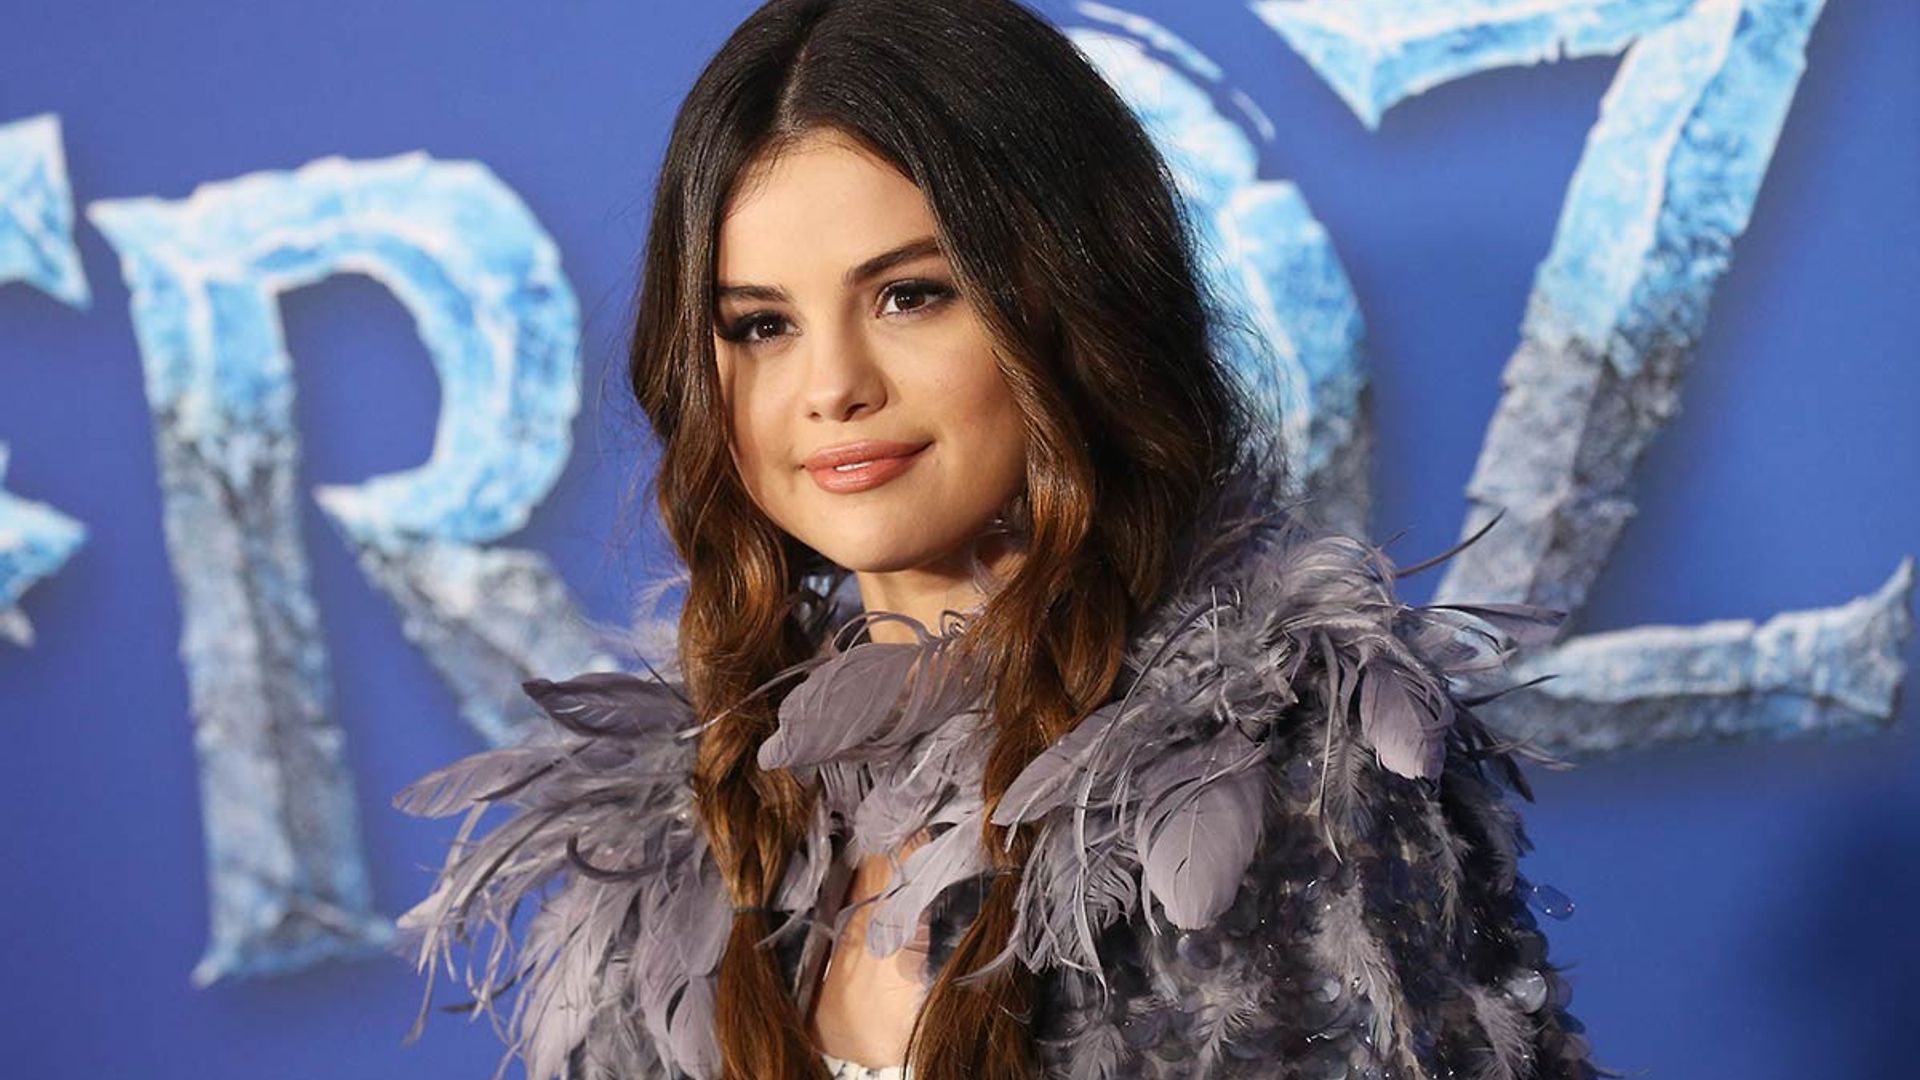 Selena Gomez opens up about body shaming: 